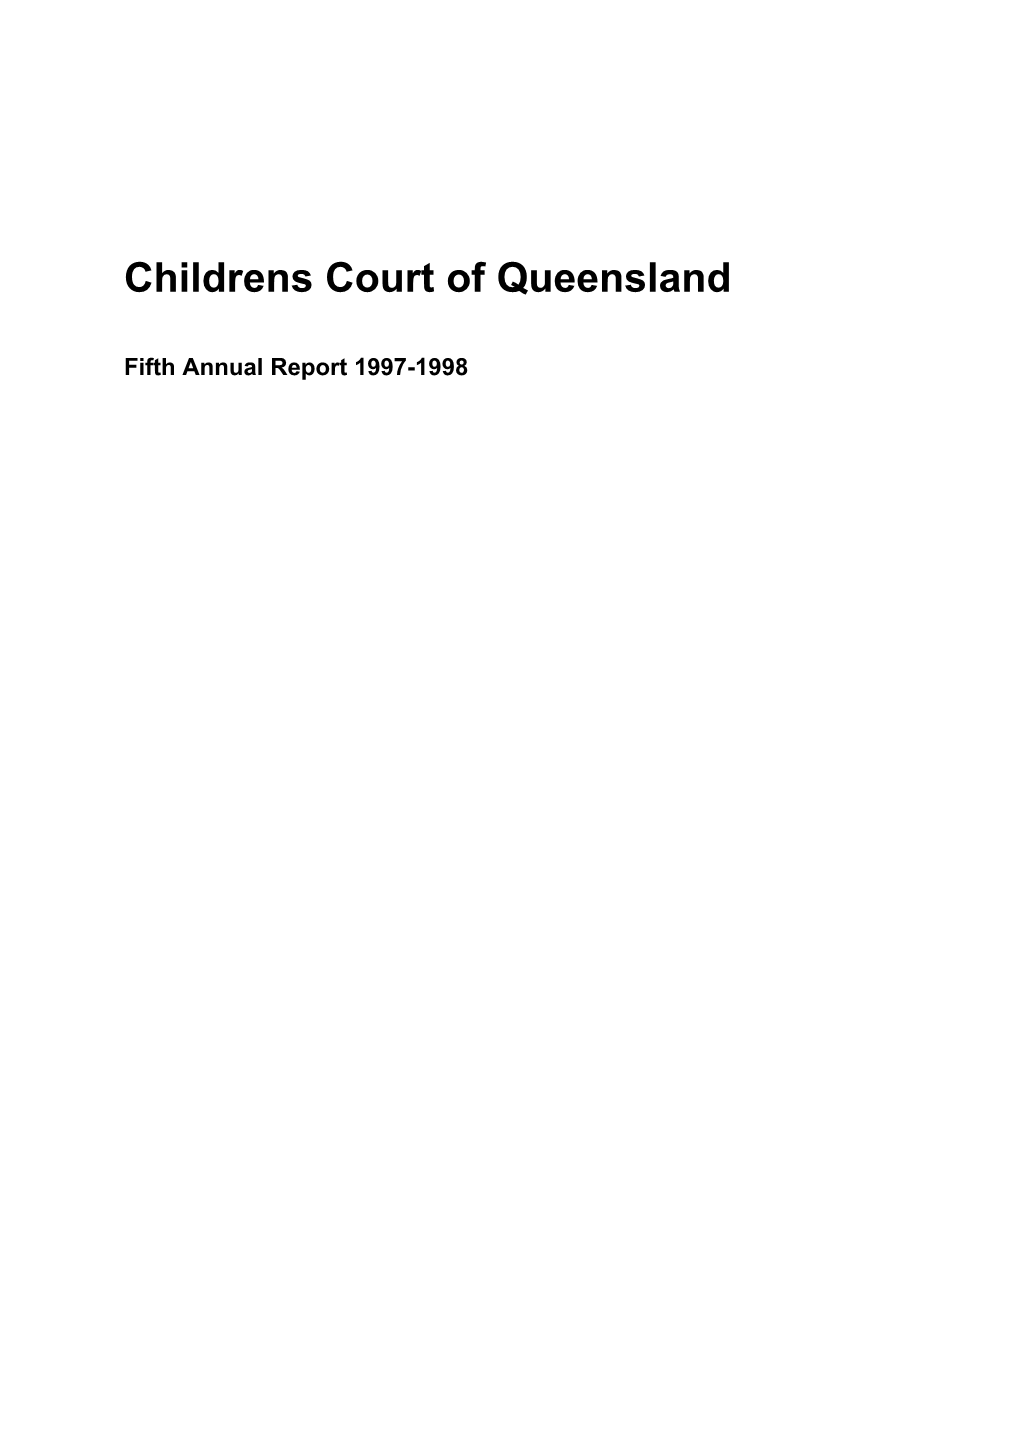 Childrens Court of Queensland Annual Report 1997-1998